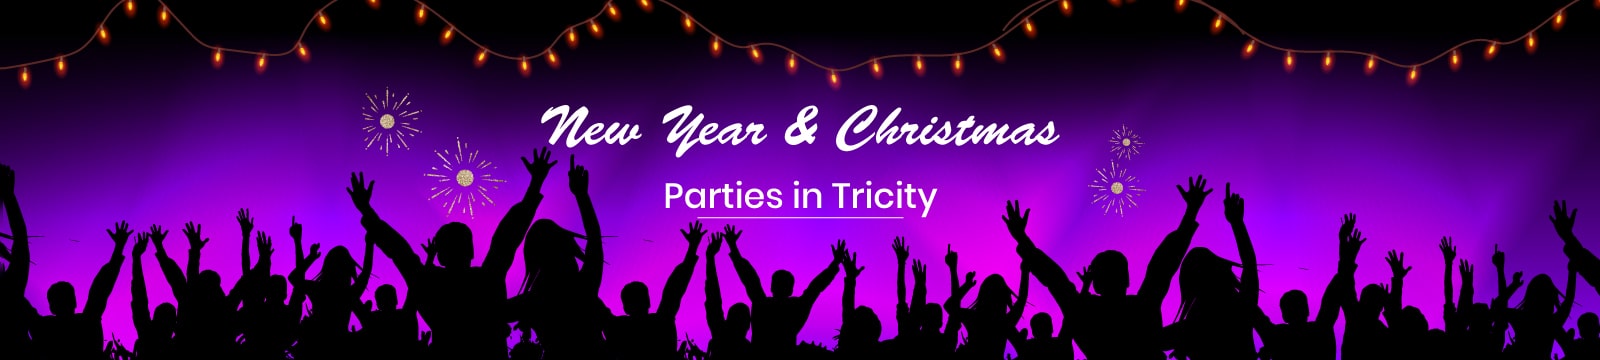 Fun is on! Celebrate Christmas and New Year with Exciting Parties